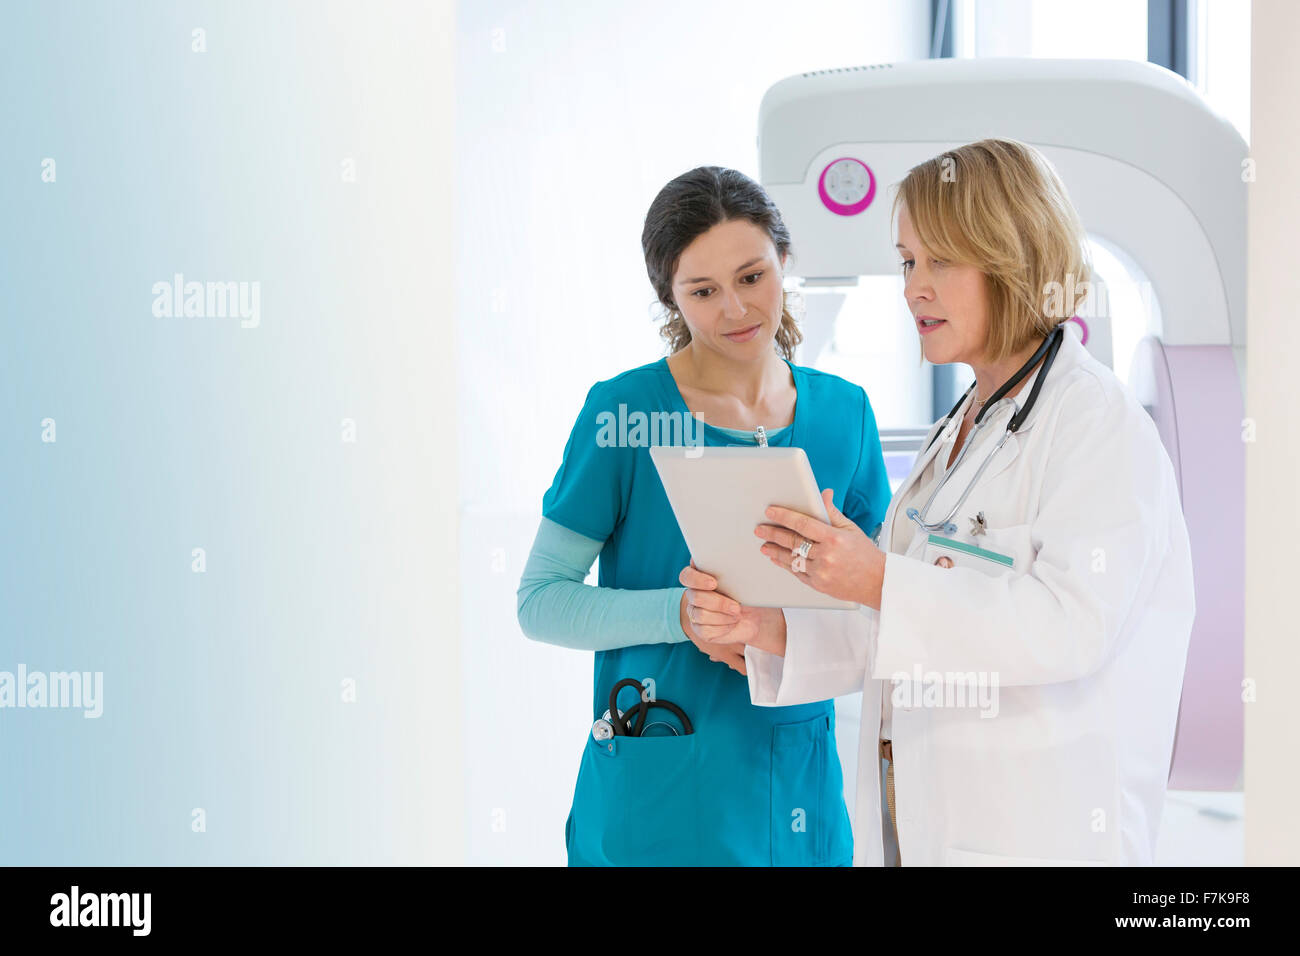 Doctor and nurse using digital tablet in examination room Banque D'Images